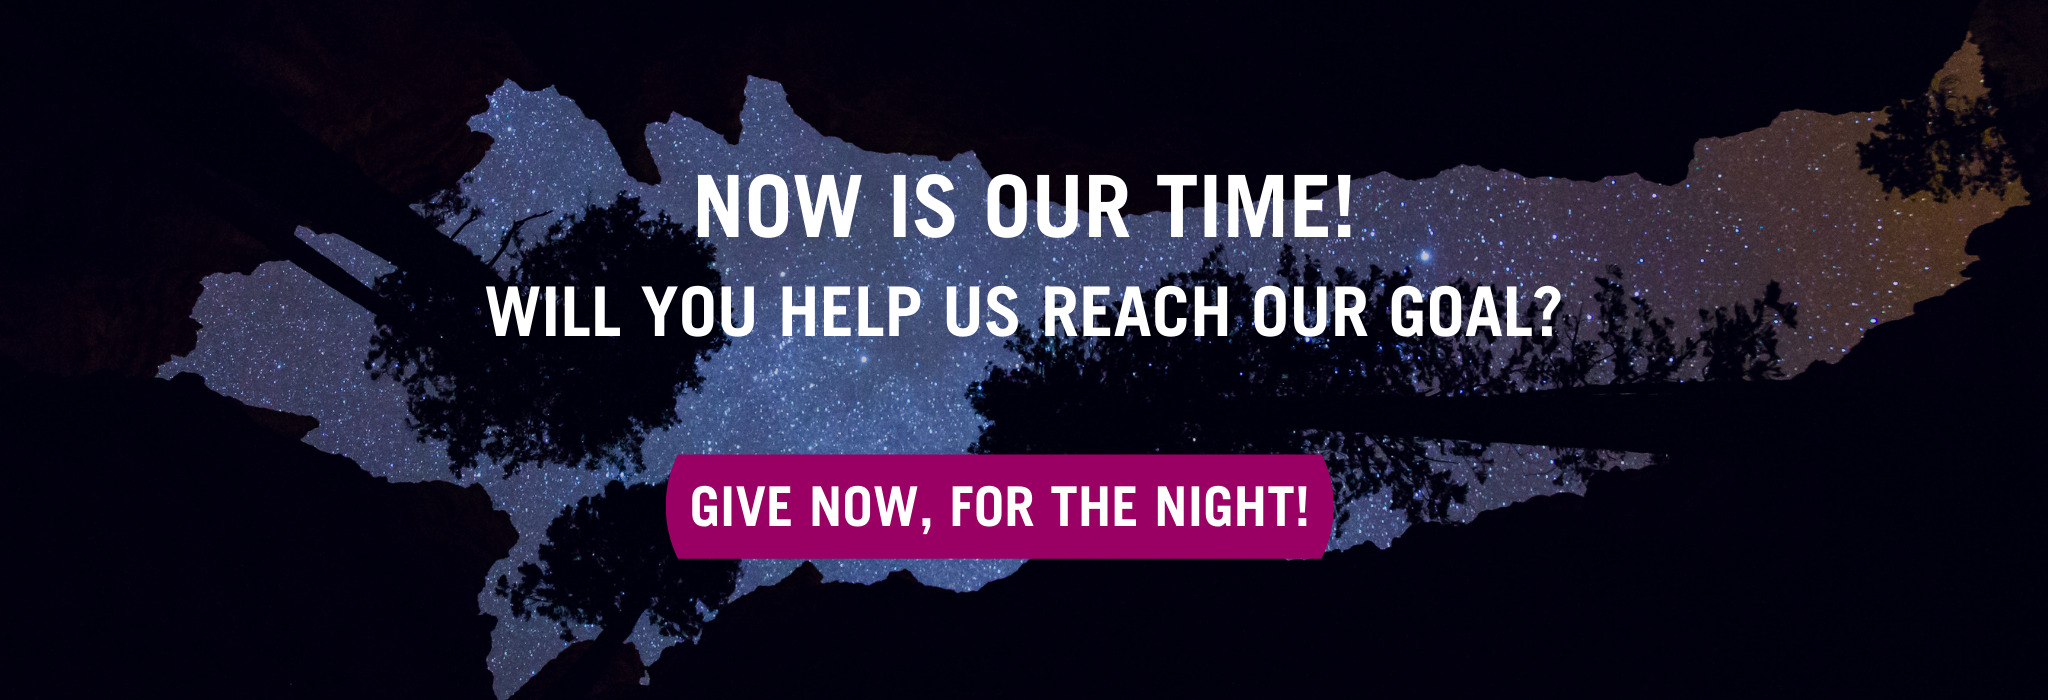 NOW IS OUR TIME WILL YOU HELP US REACH OUR GOAL GIVE NOW FOR THE NIGHT